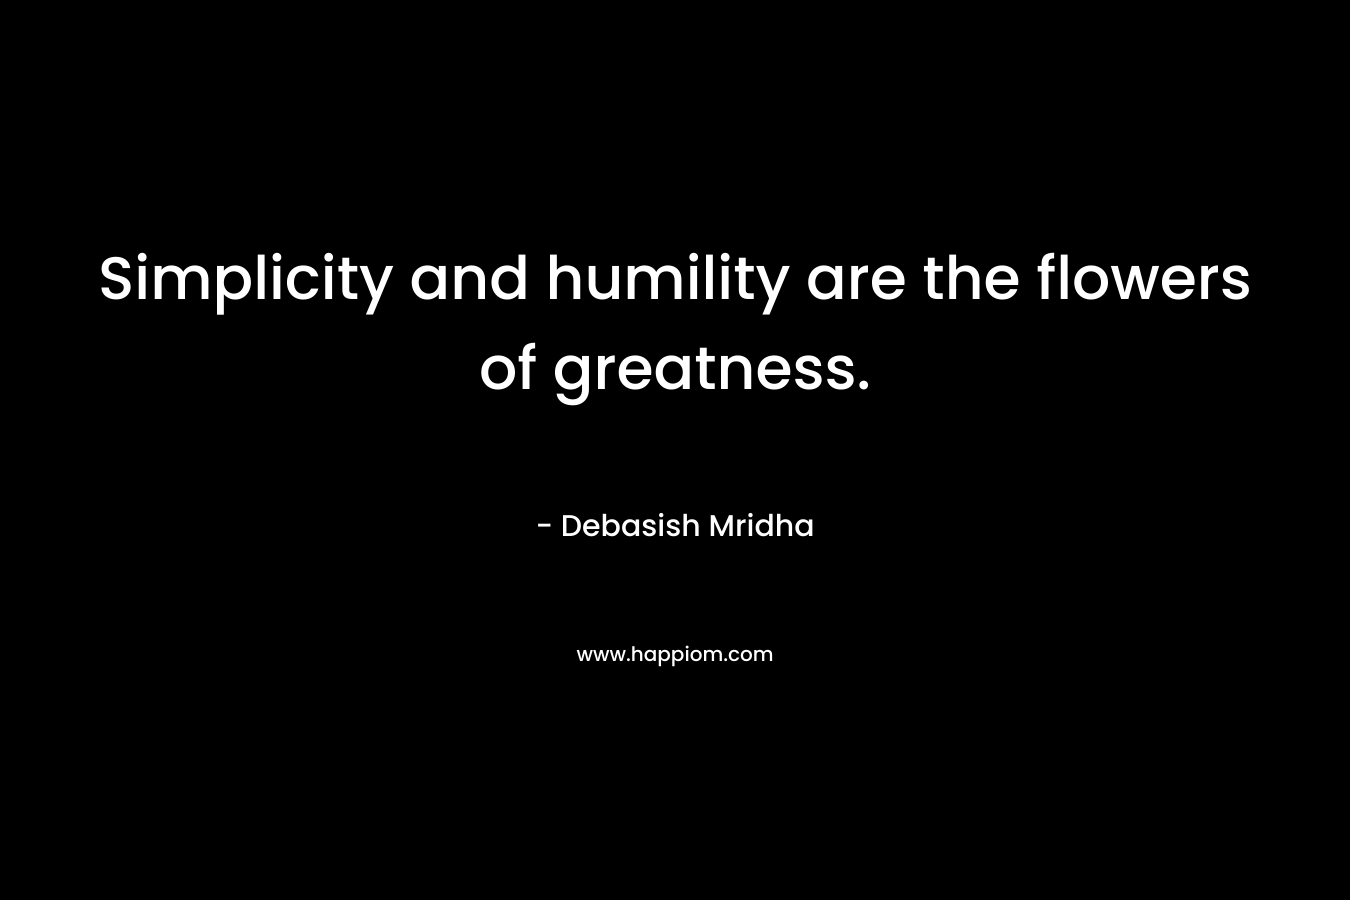 Simplicity and humility are the flowers of greatness.